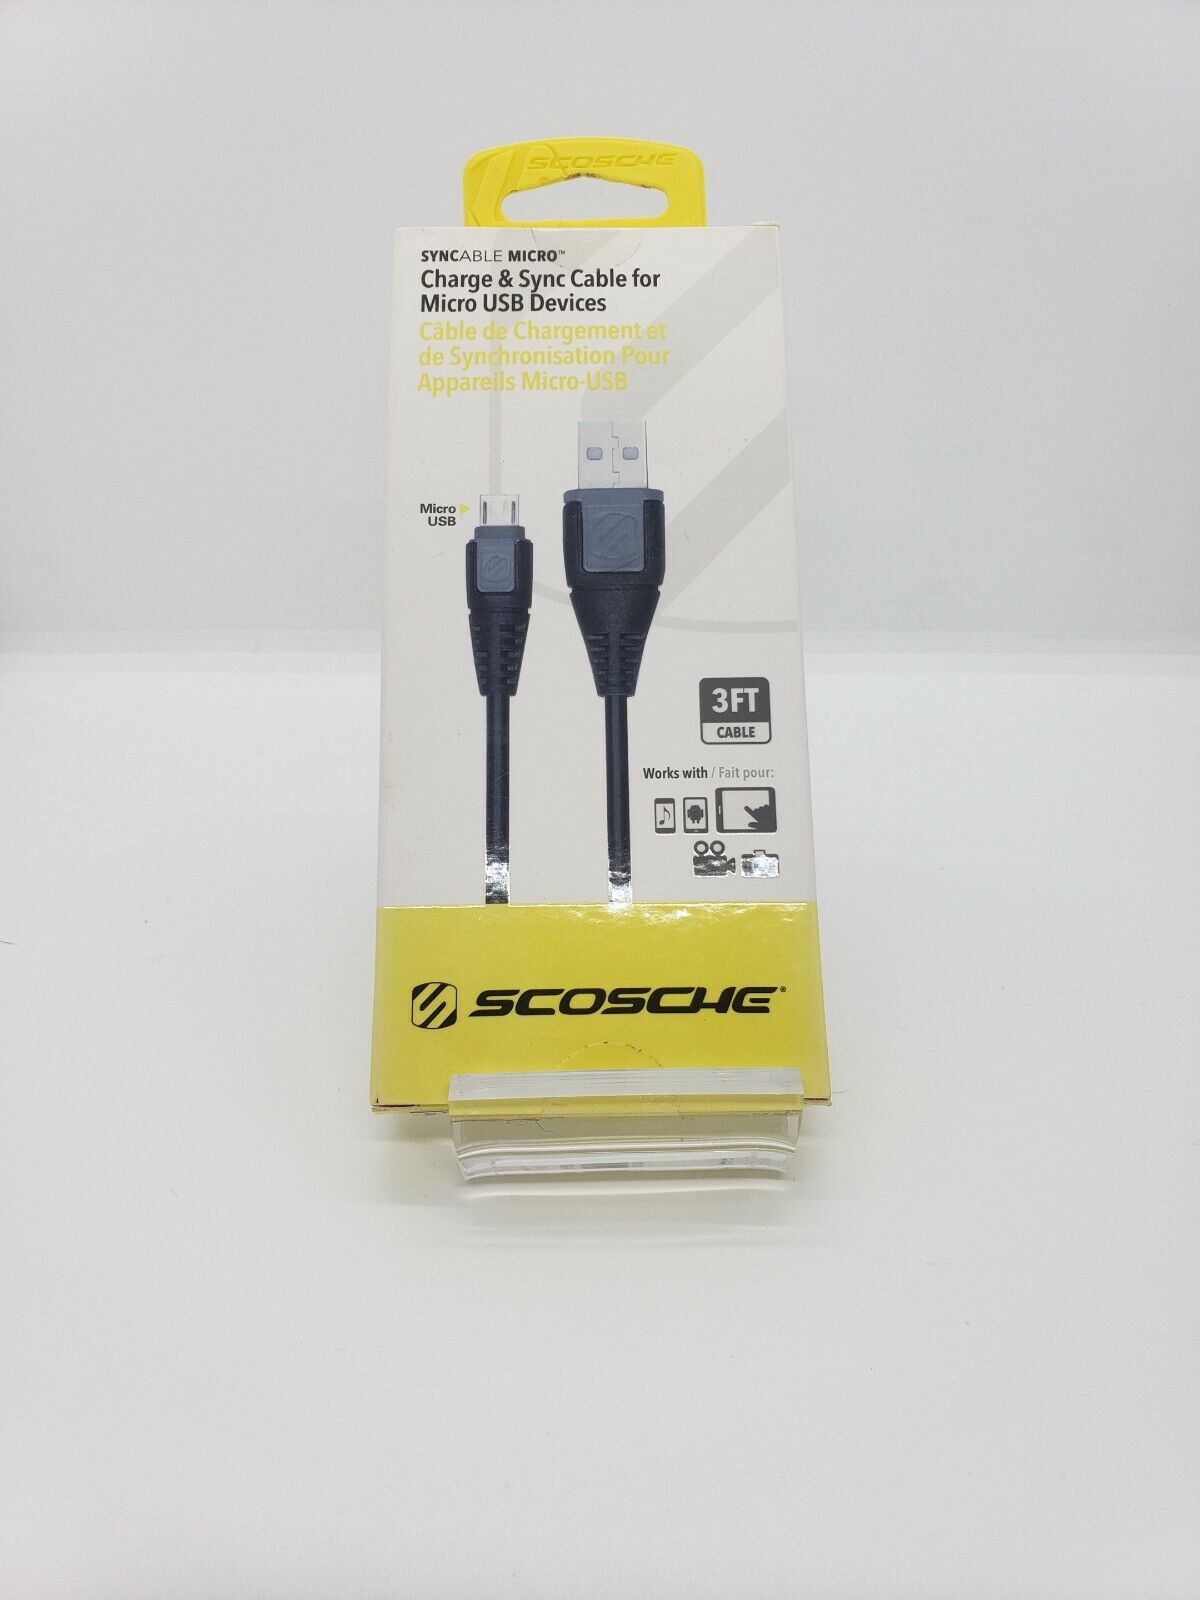 Scosche Charge and Sync Cable for Micro USB Devices